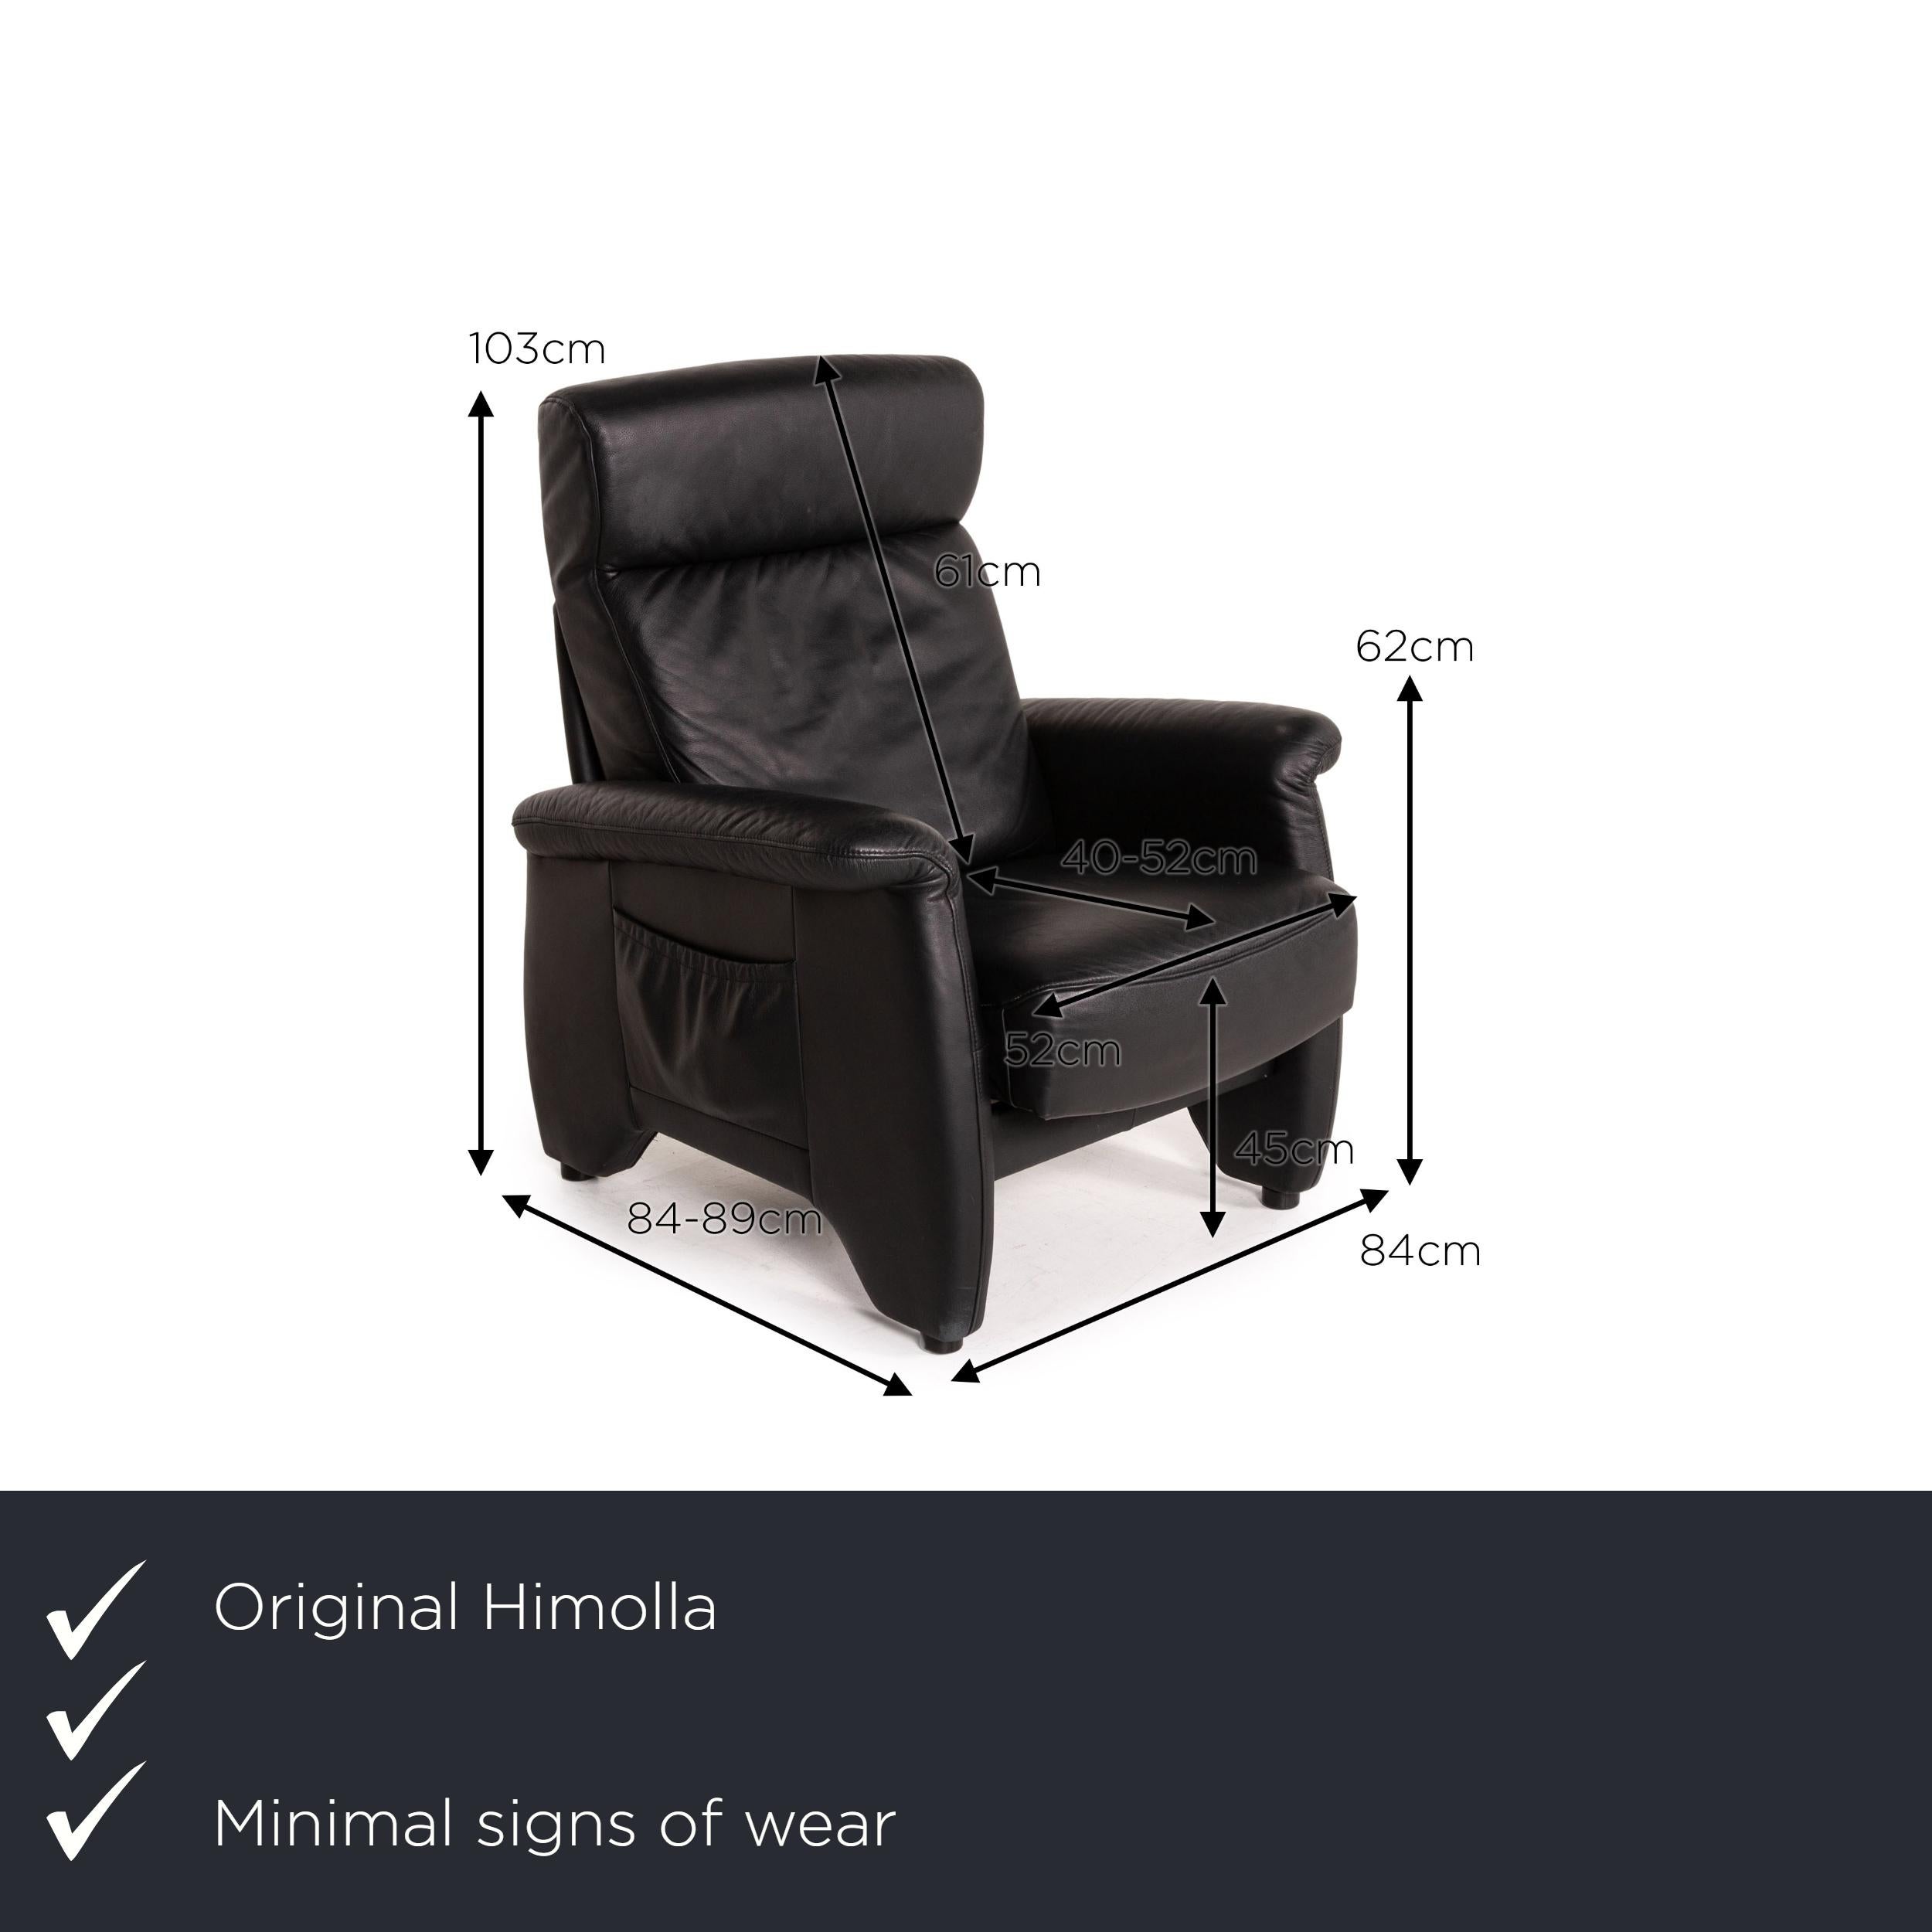 We present to you a Himolla Ergoline leather armchair black function.
 

 Product measurements in centimeters:
 

Depth: 84
Width: 84
Height: 103
Seat height: 45
Rest height: 62
Seat depth: 40
Seat width: 52
Back height: 61.
 